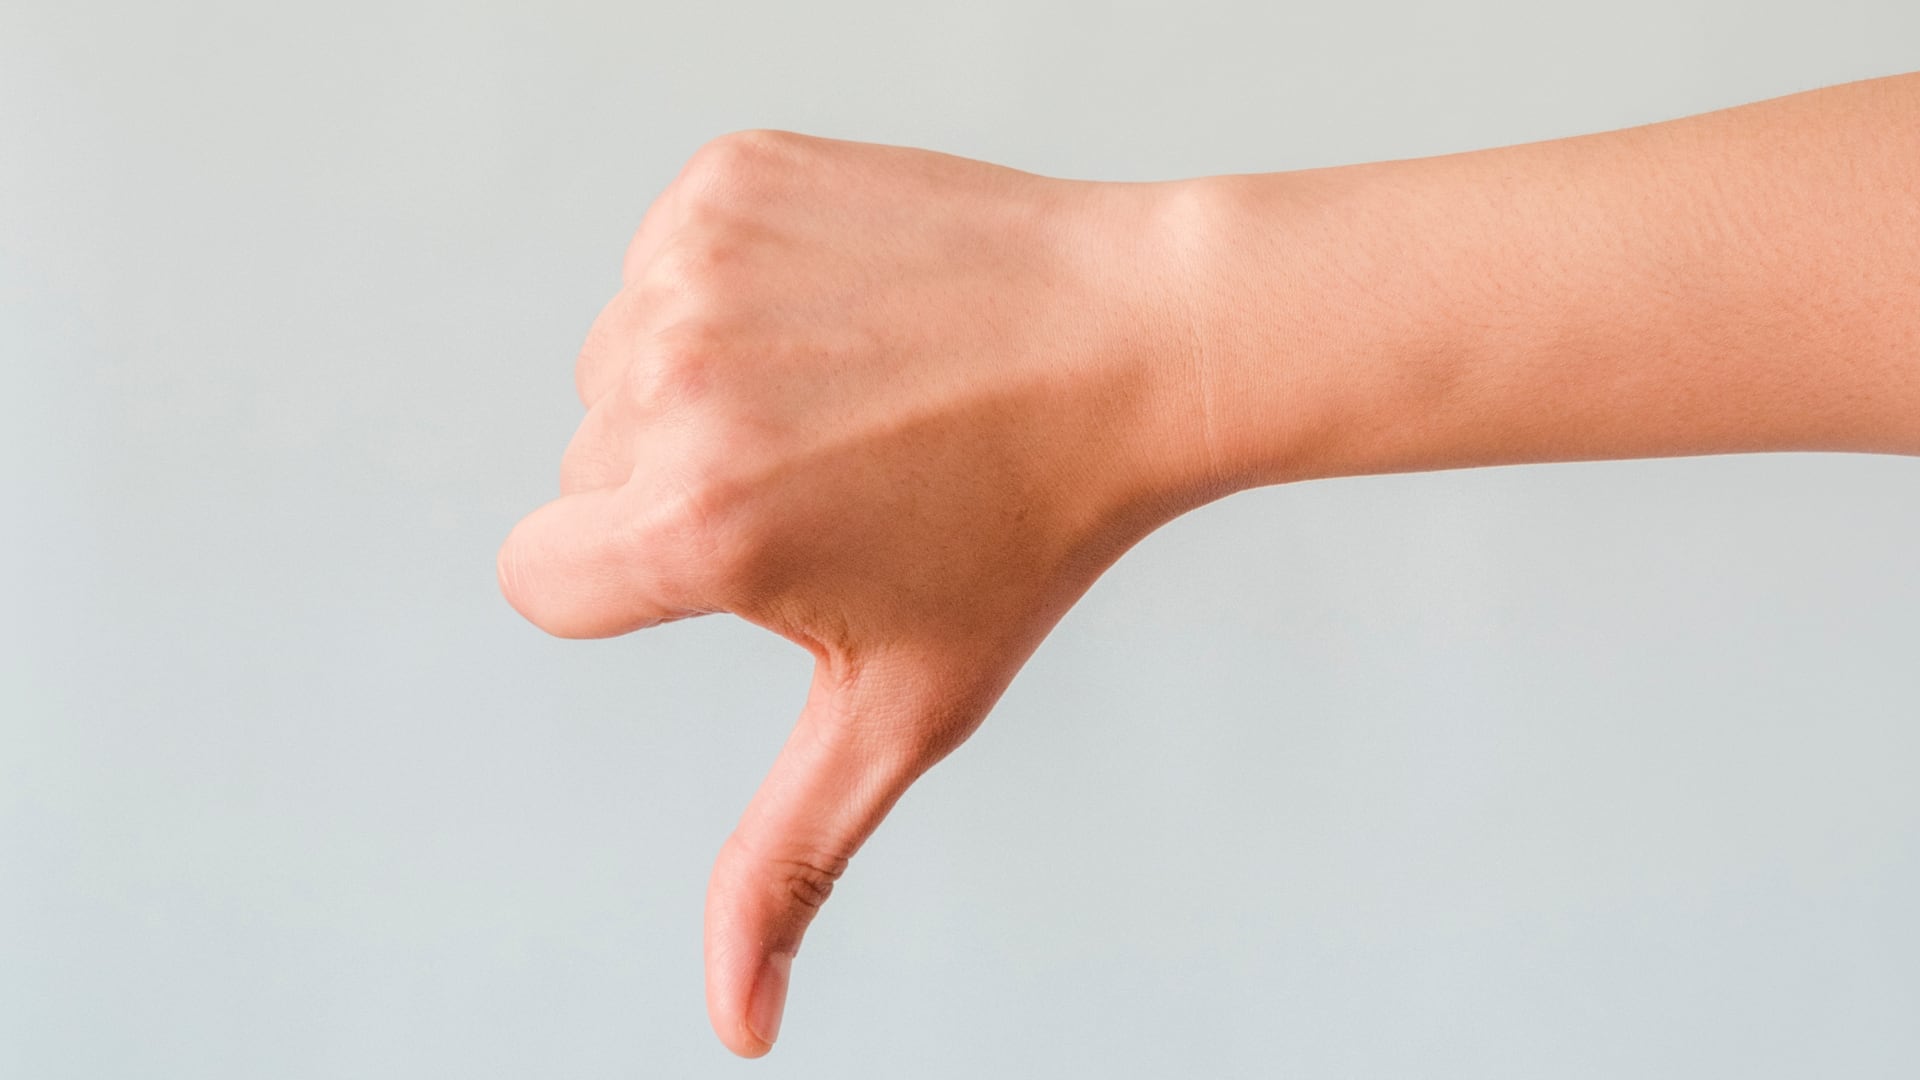 A male hand showing a thumbs-down gesture